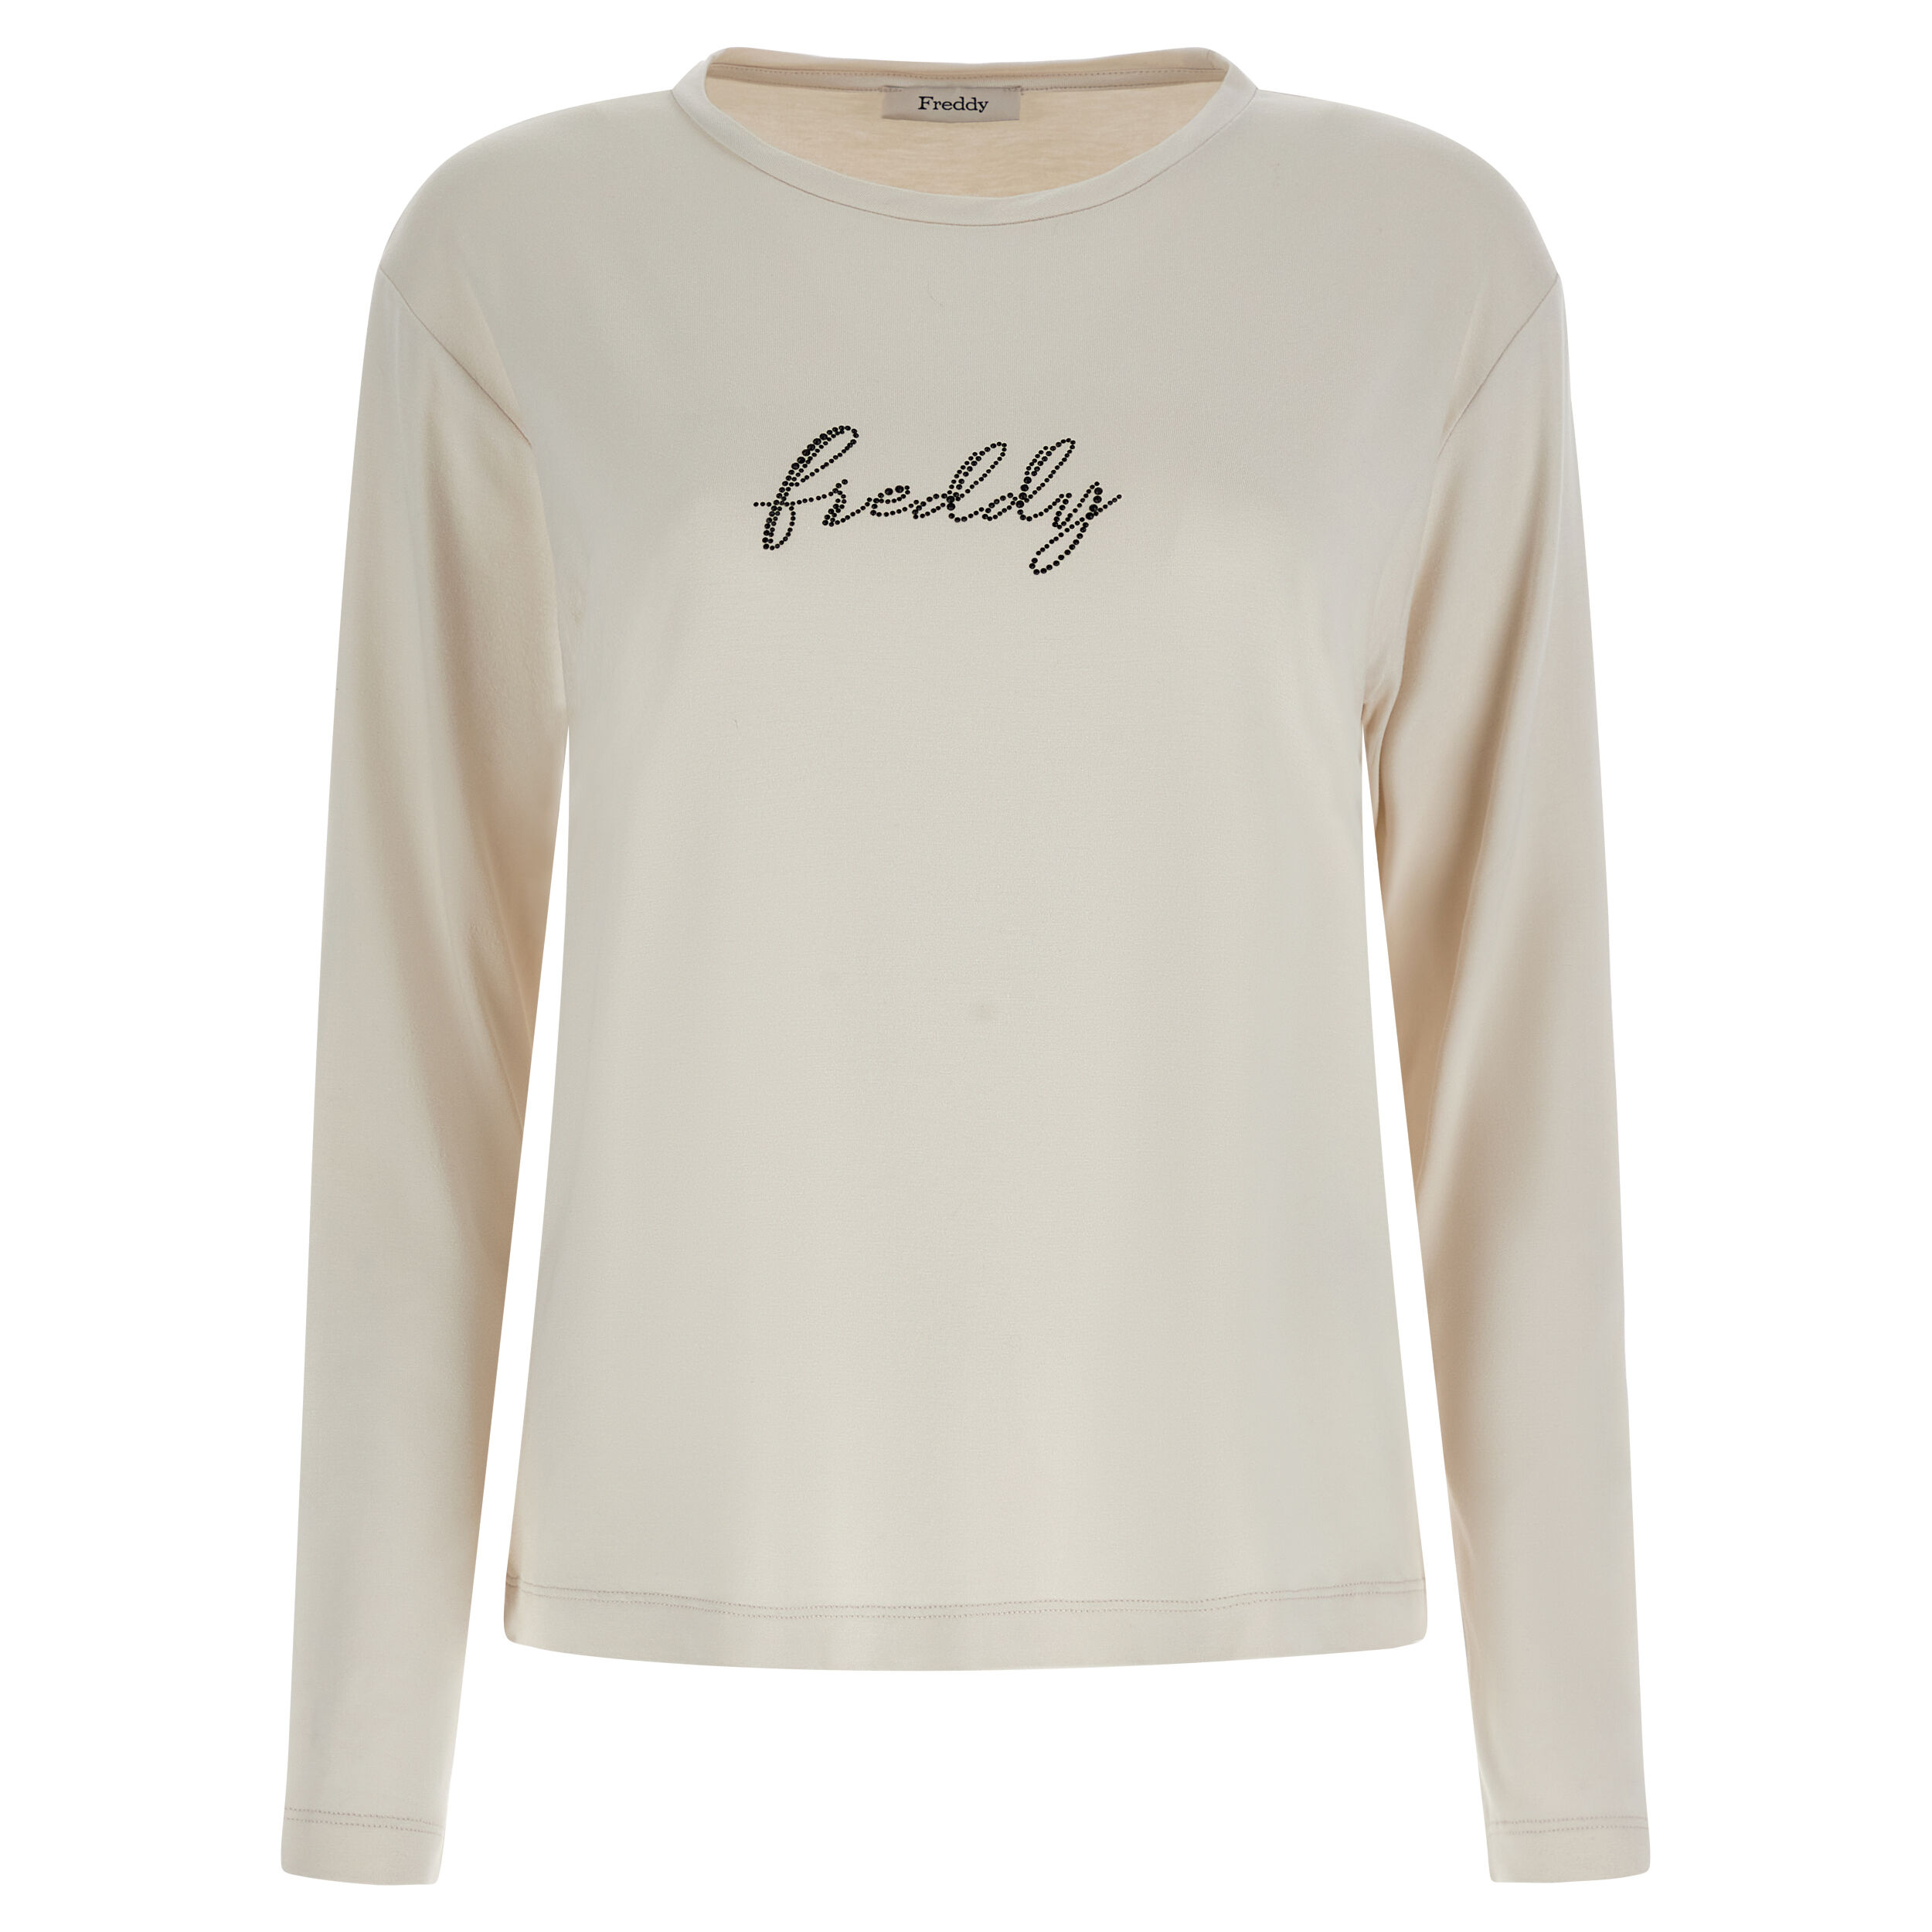 Freddy T-shirt manica lunga in jersey viscosa con logo in strass White Sand Donna Extra Small